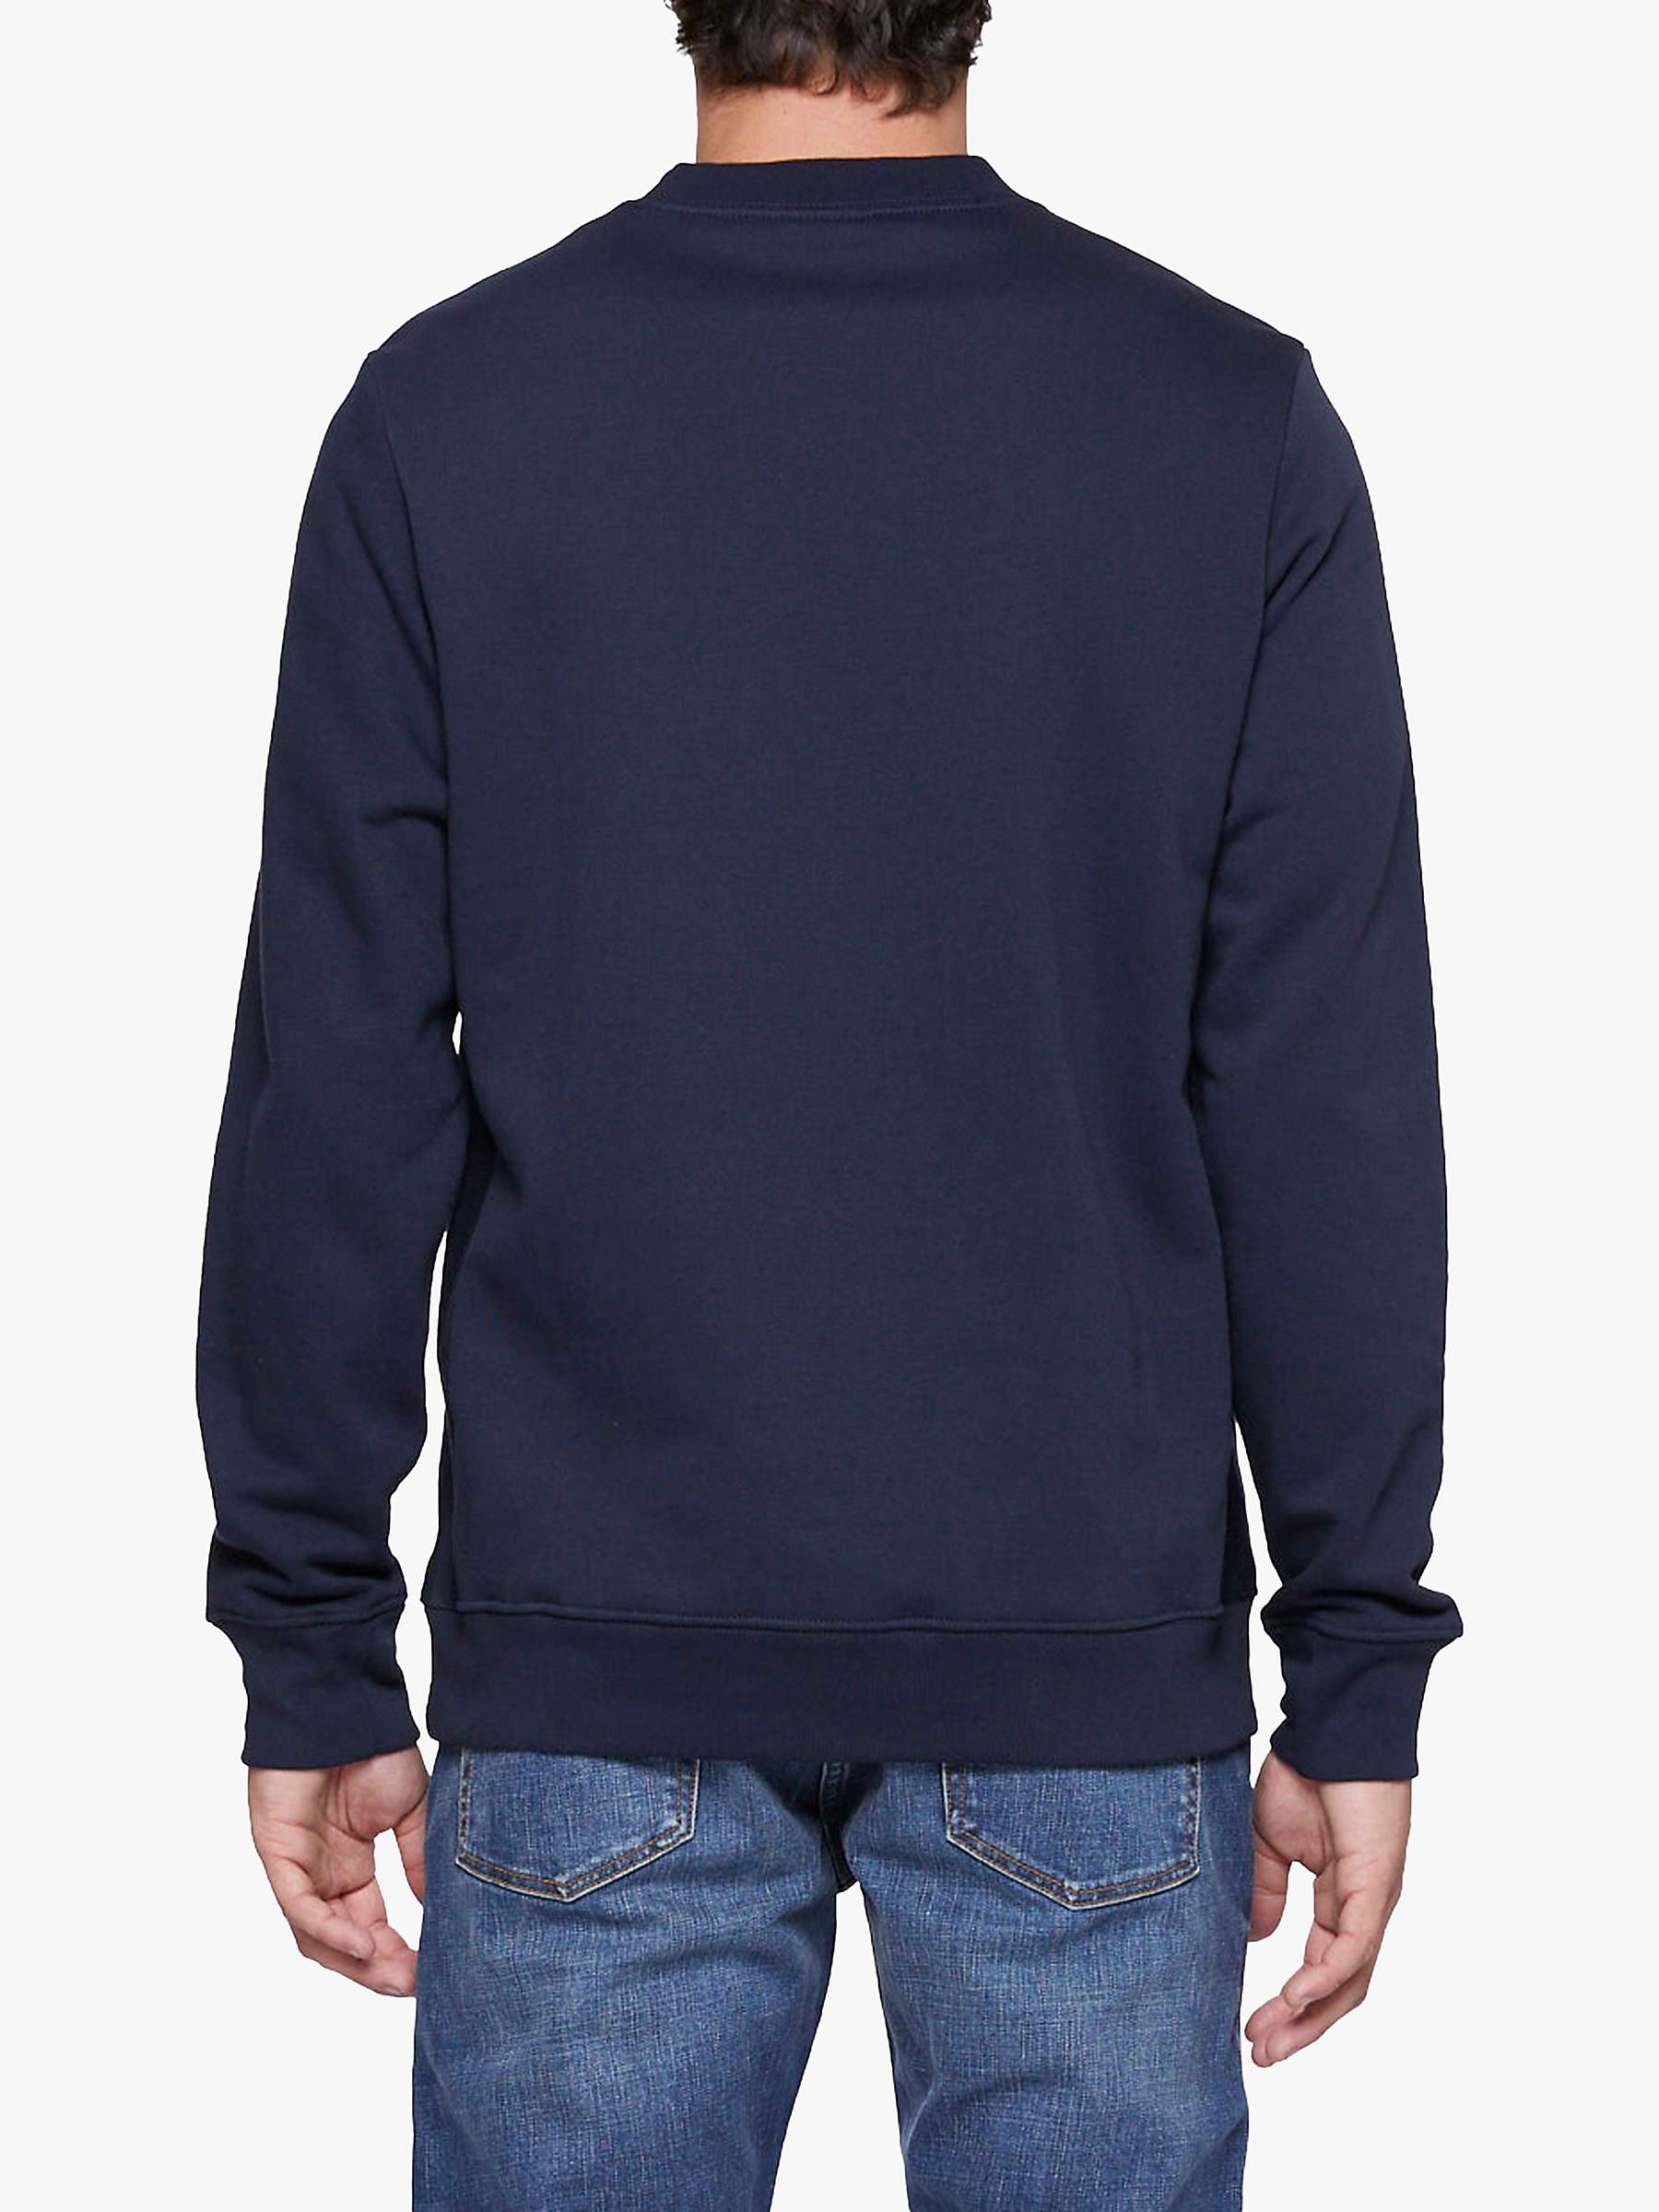 Buy Paul Smith Zebra Embroidered Organic Cotton Jumper Online at johnlewis.com